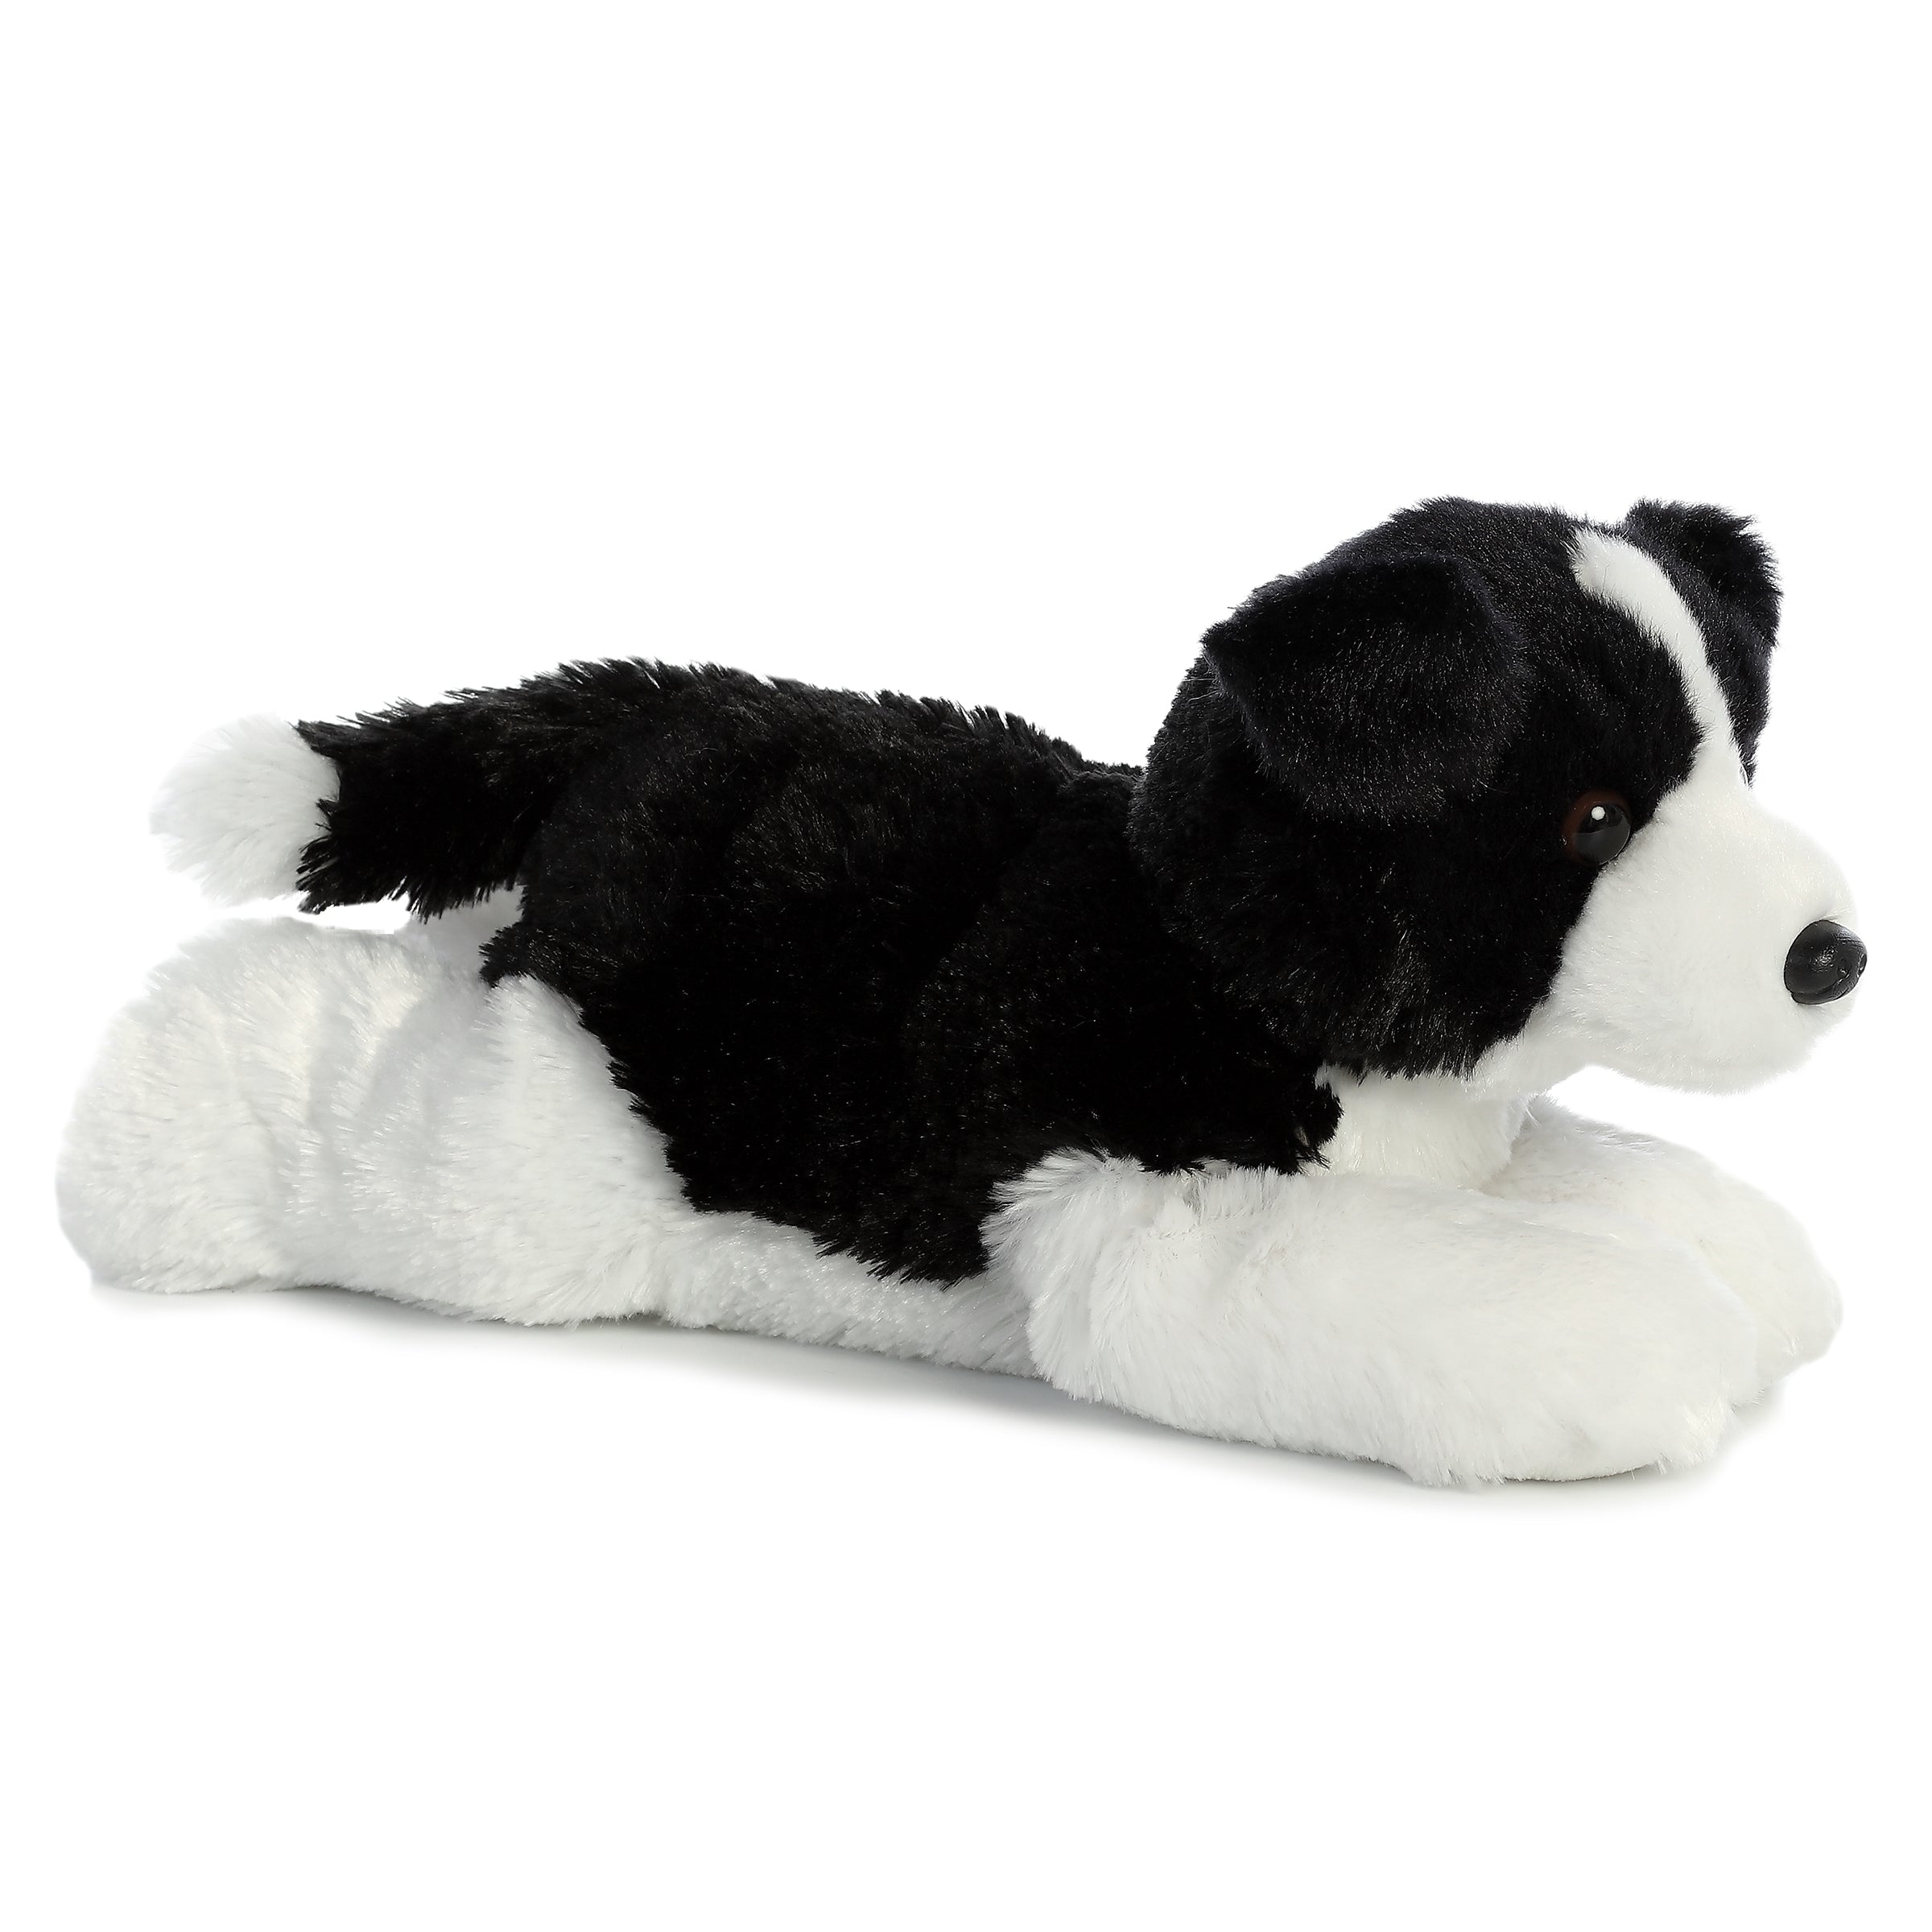 border collie red dog toys cute dog Fabric